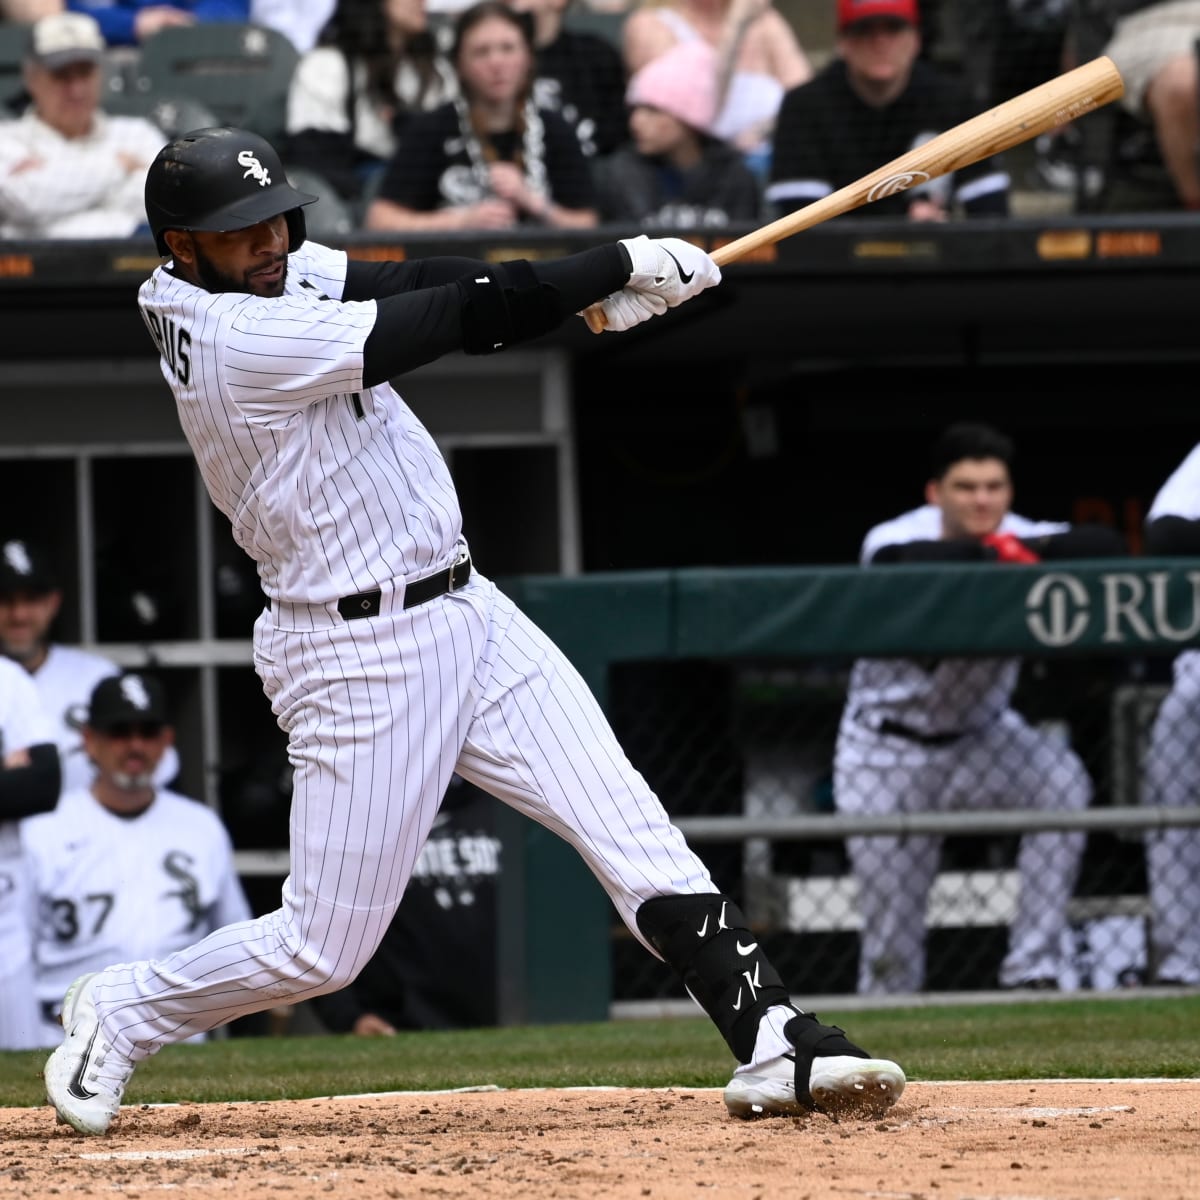 Elvis Andrus could be key for White Sox